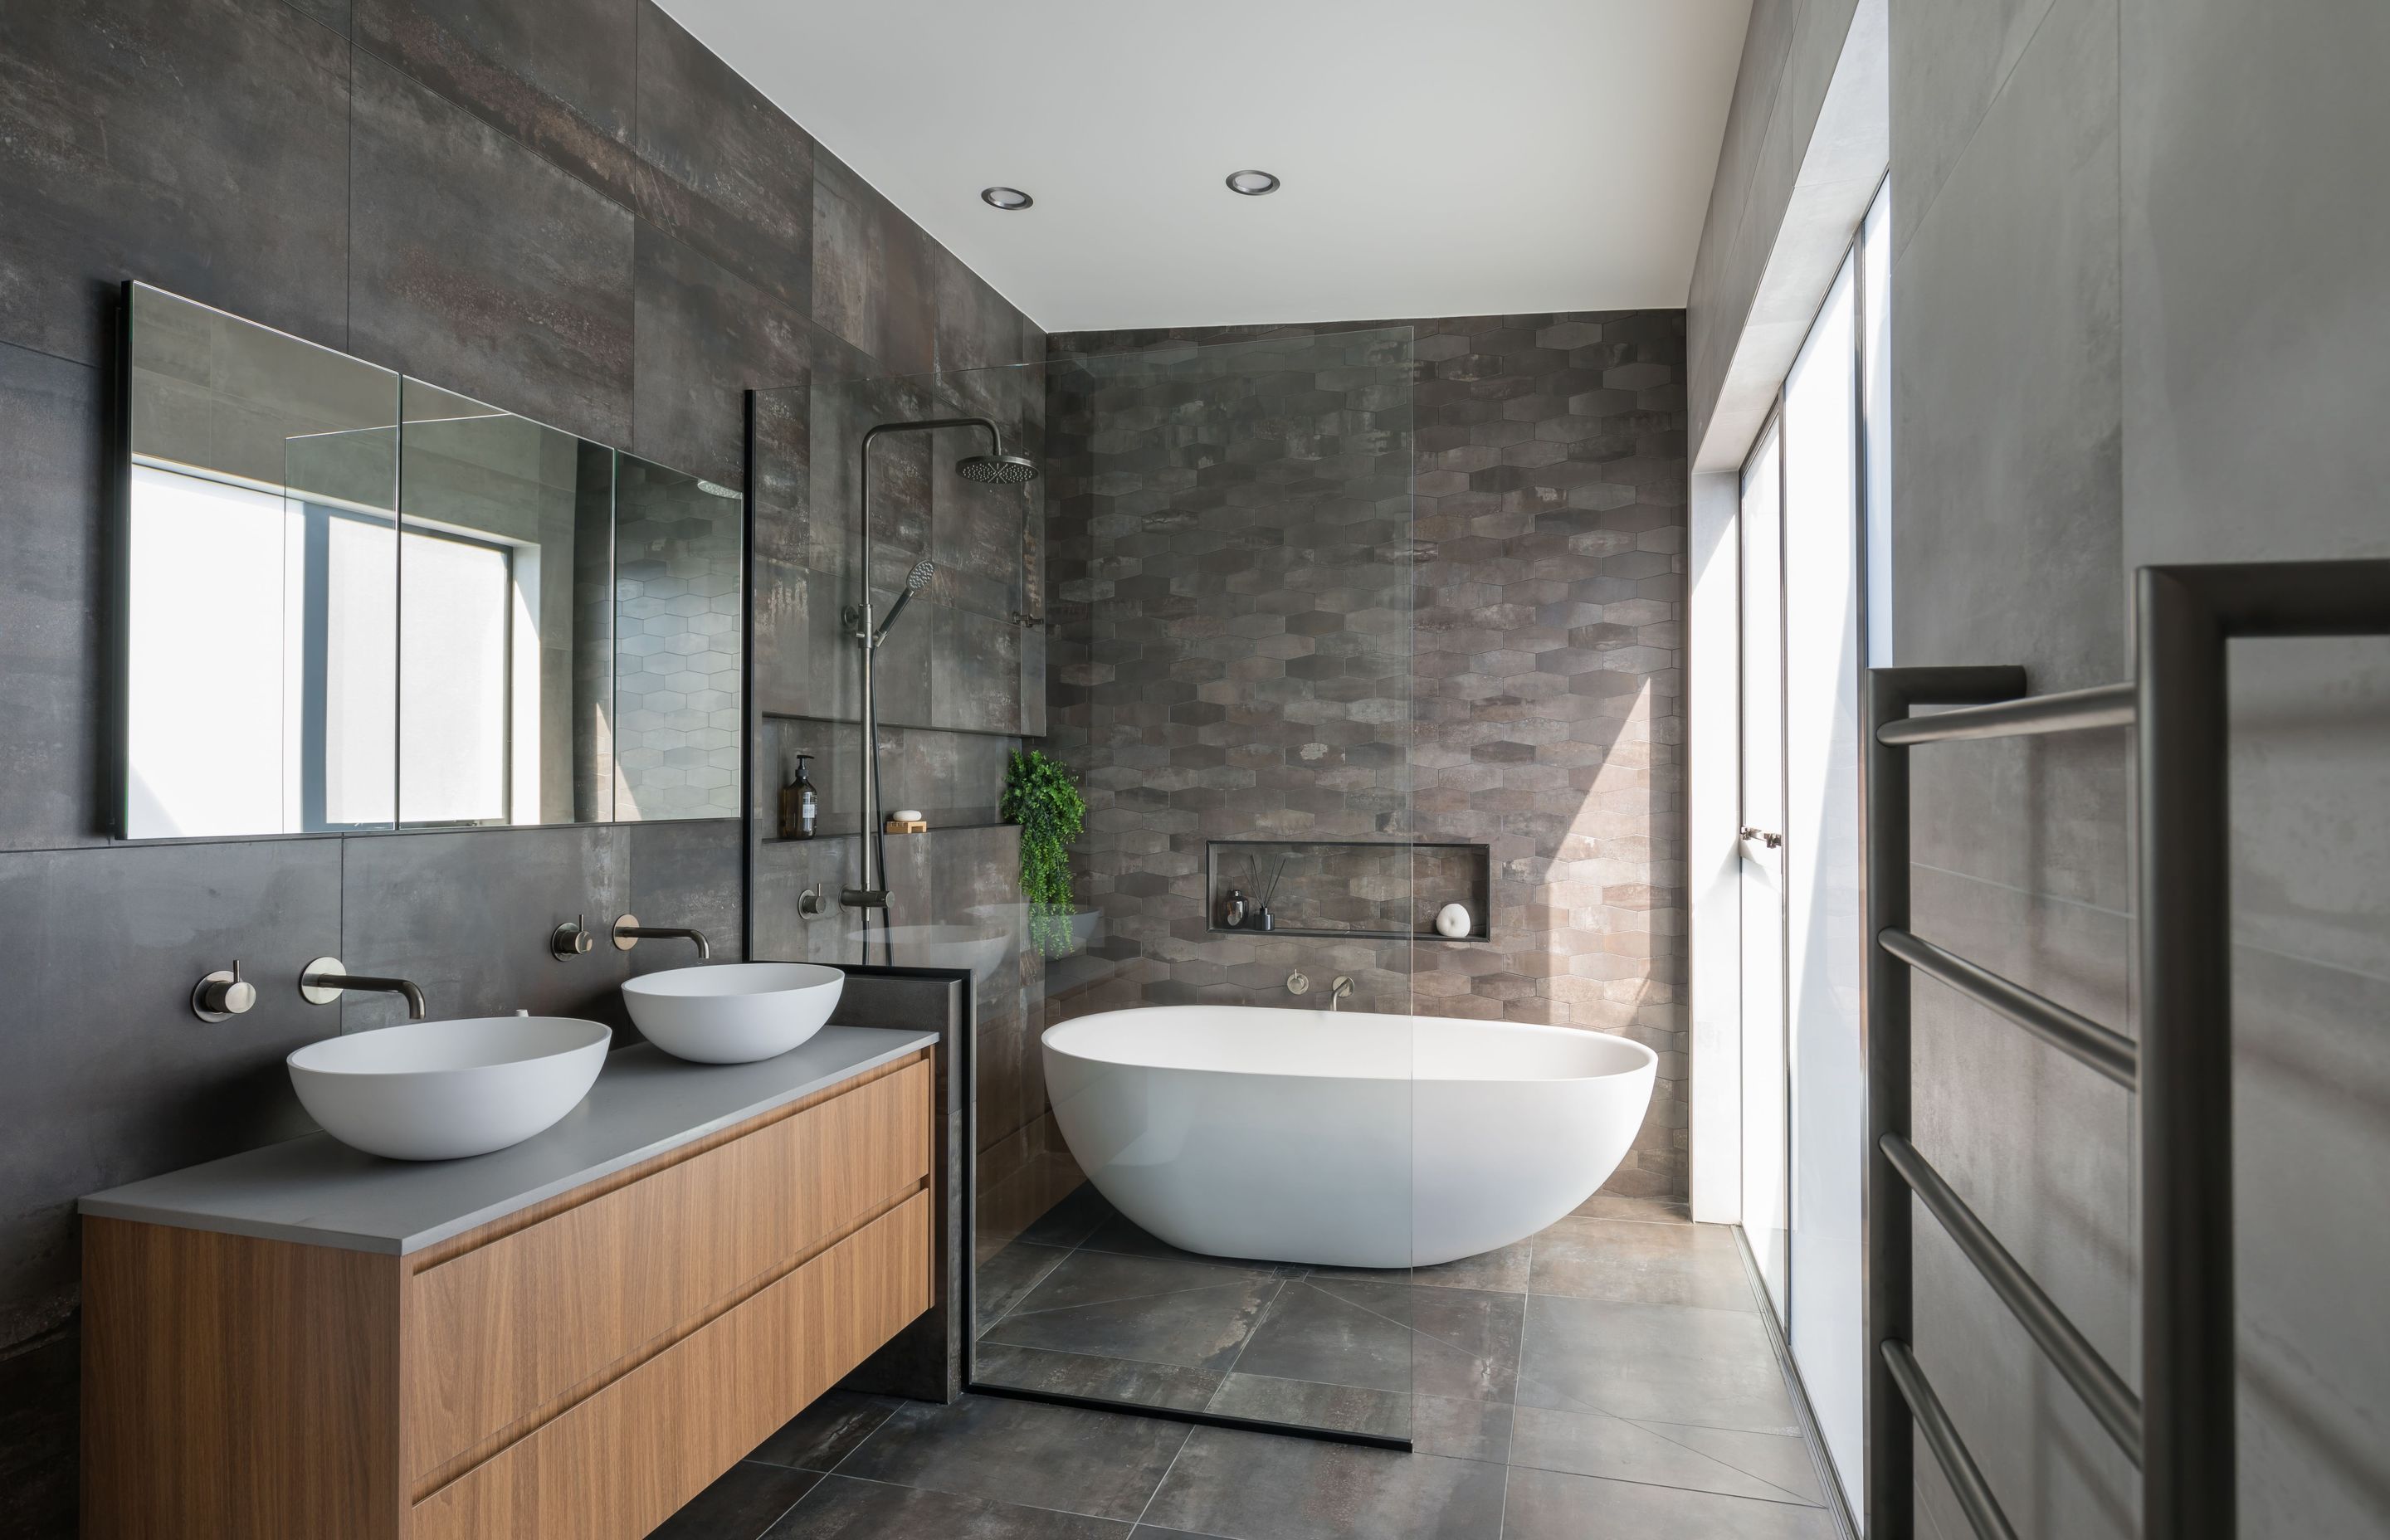 Ensuite Bathroom - walk in wet room with bath and shower